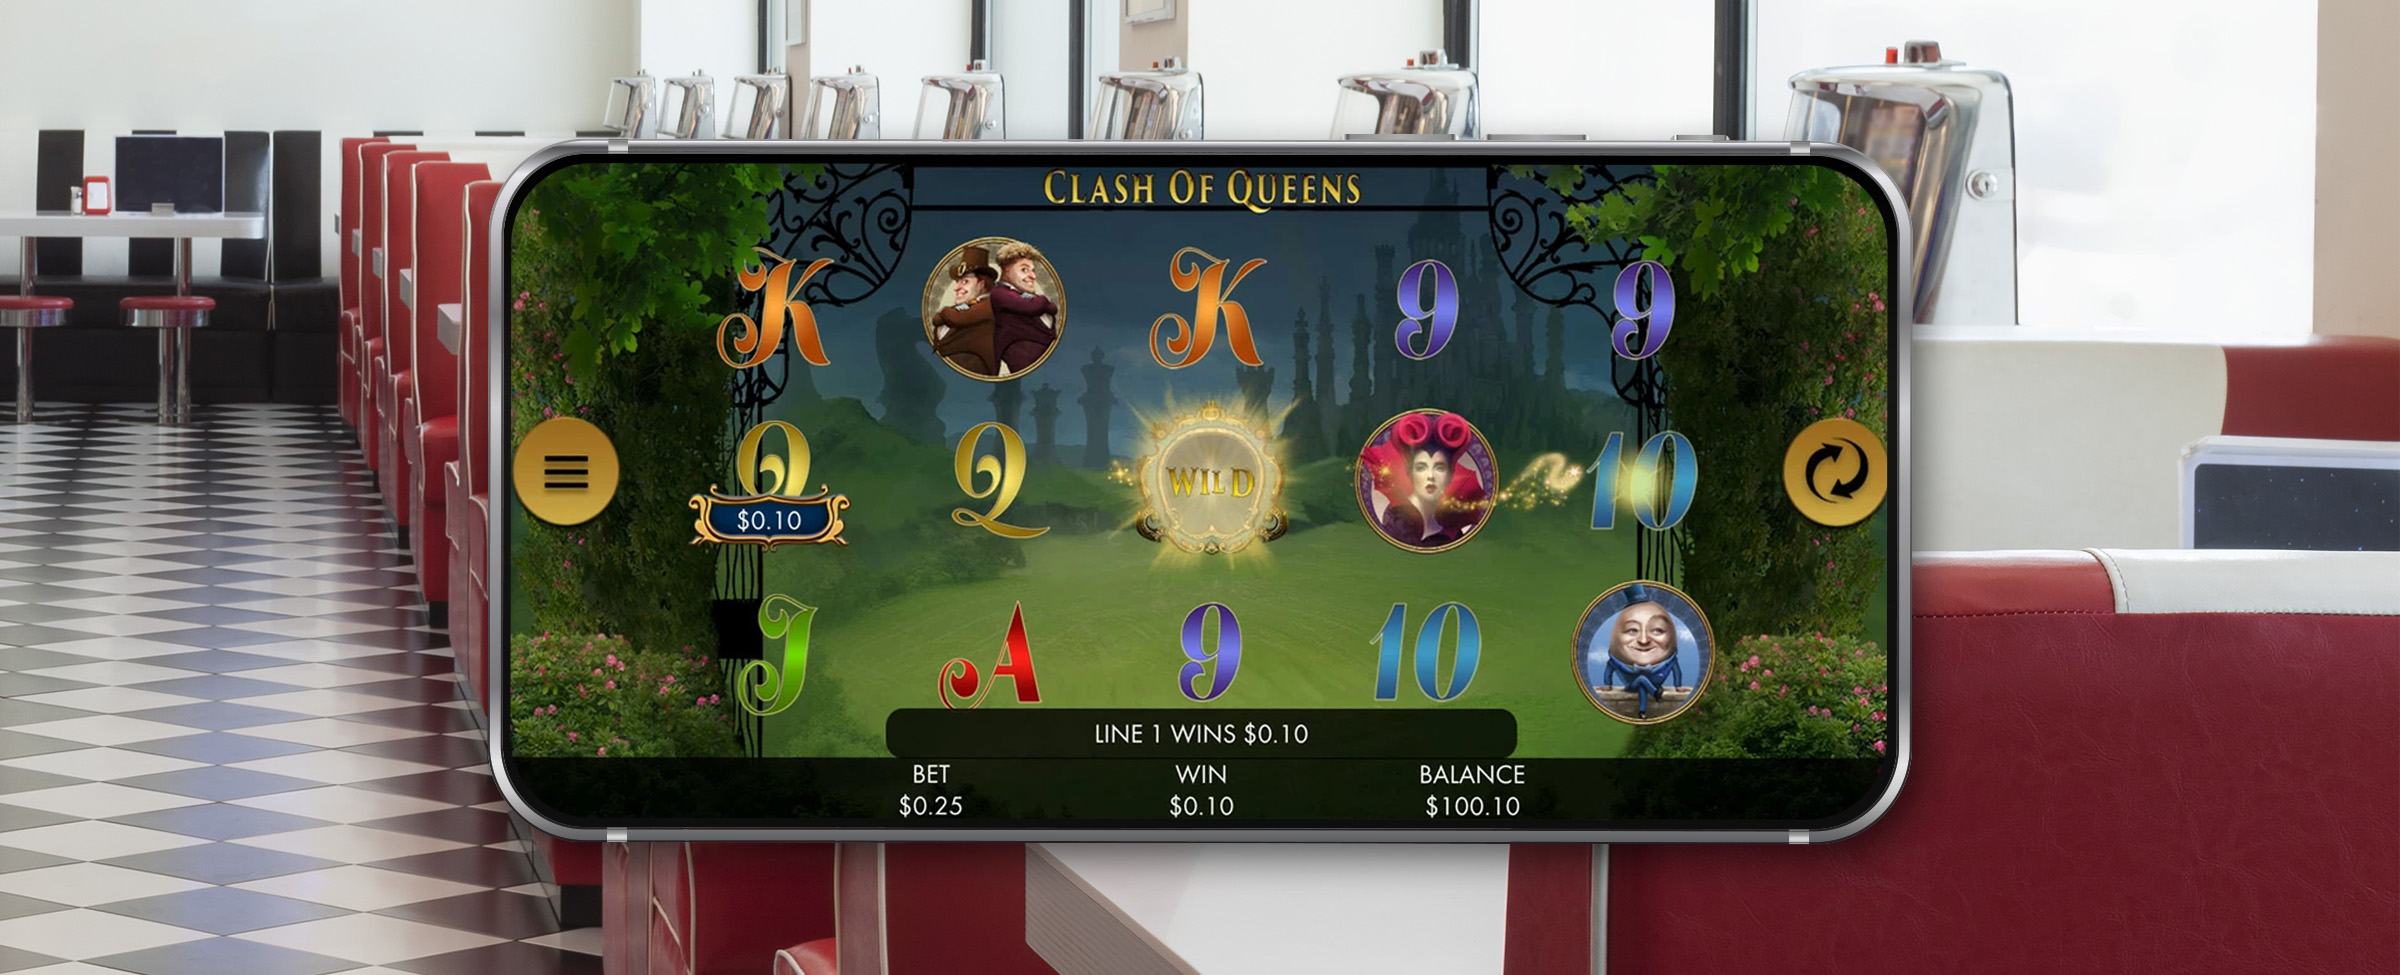 A mobile phone is shown front and center of the image, previewing a screen from the Cafe Casino slot game, Clash of Queens, while an American diner appears in the background.